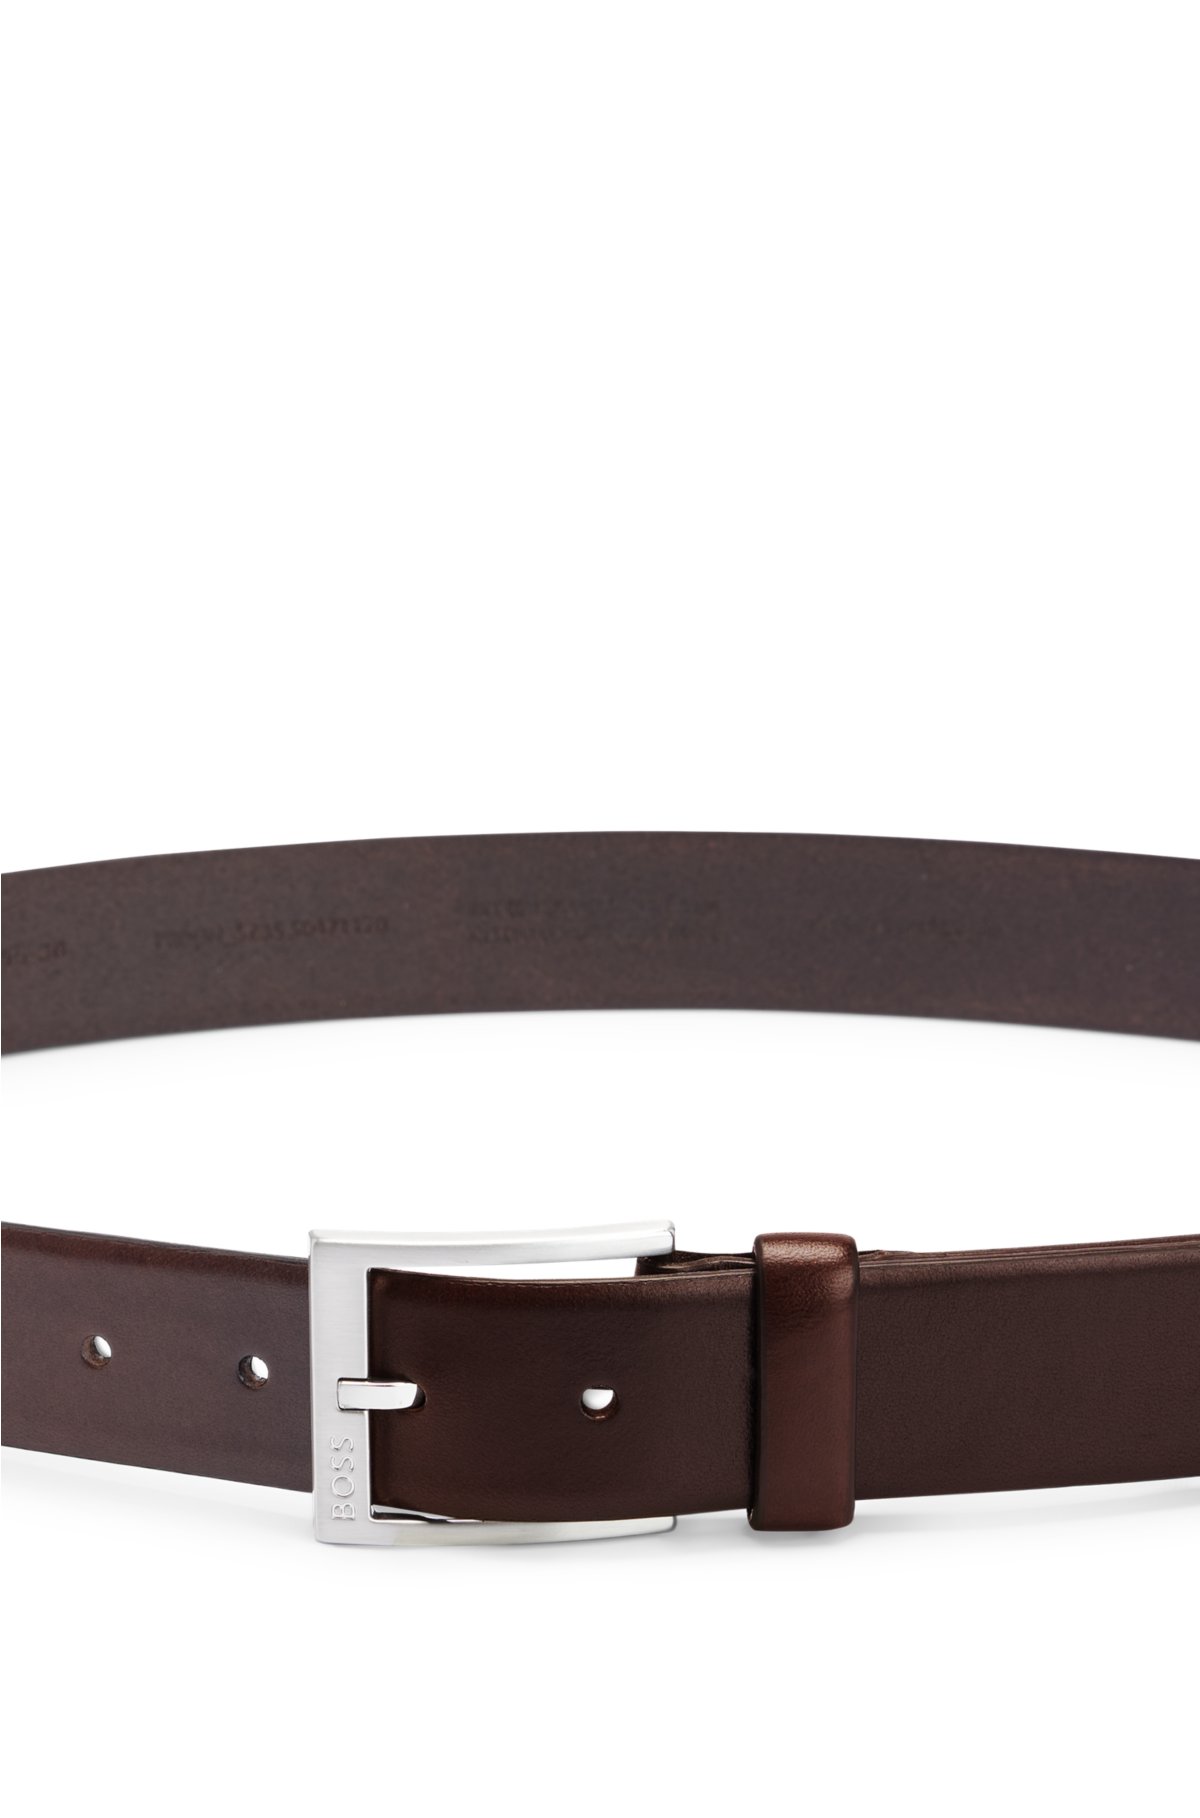 BOSS - Italian-leather belt with silver-toned buckle